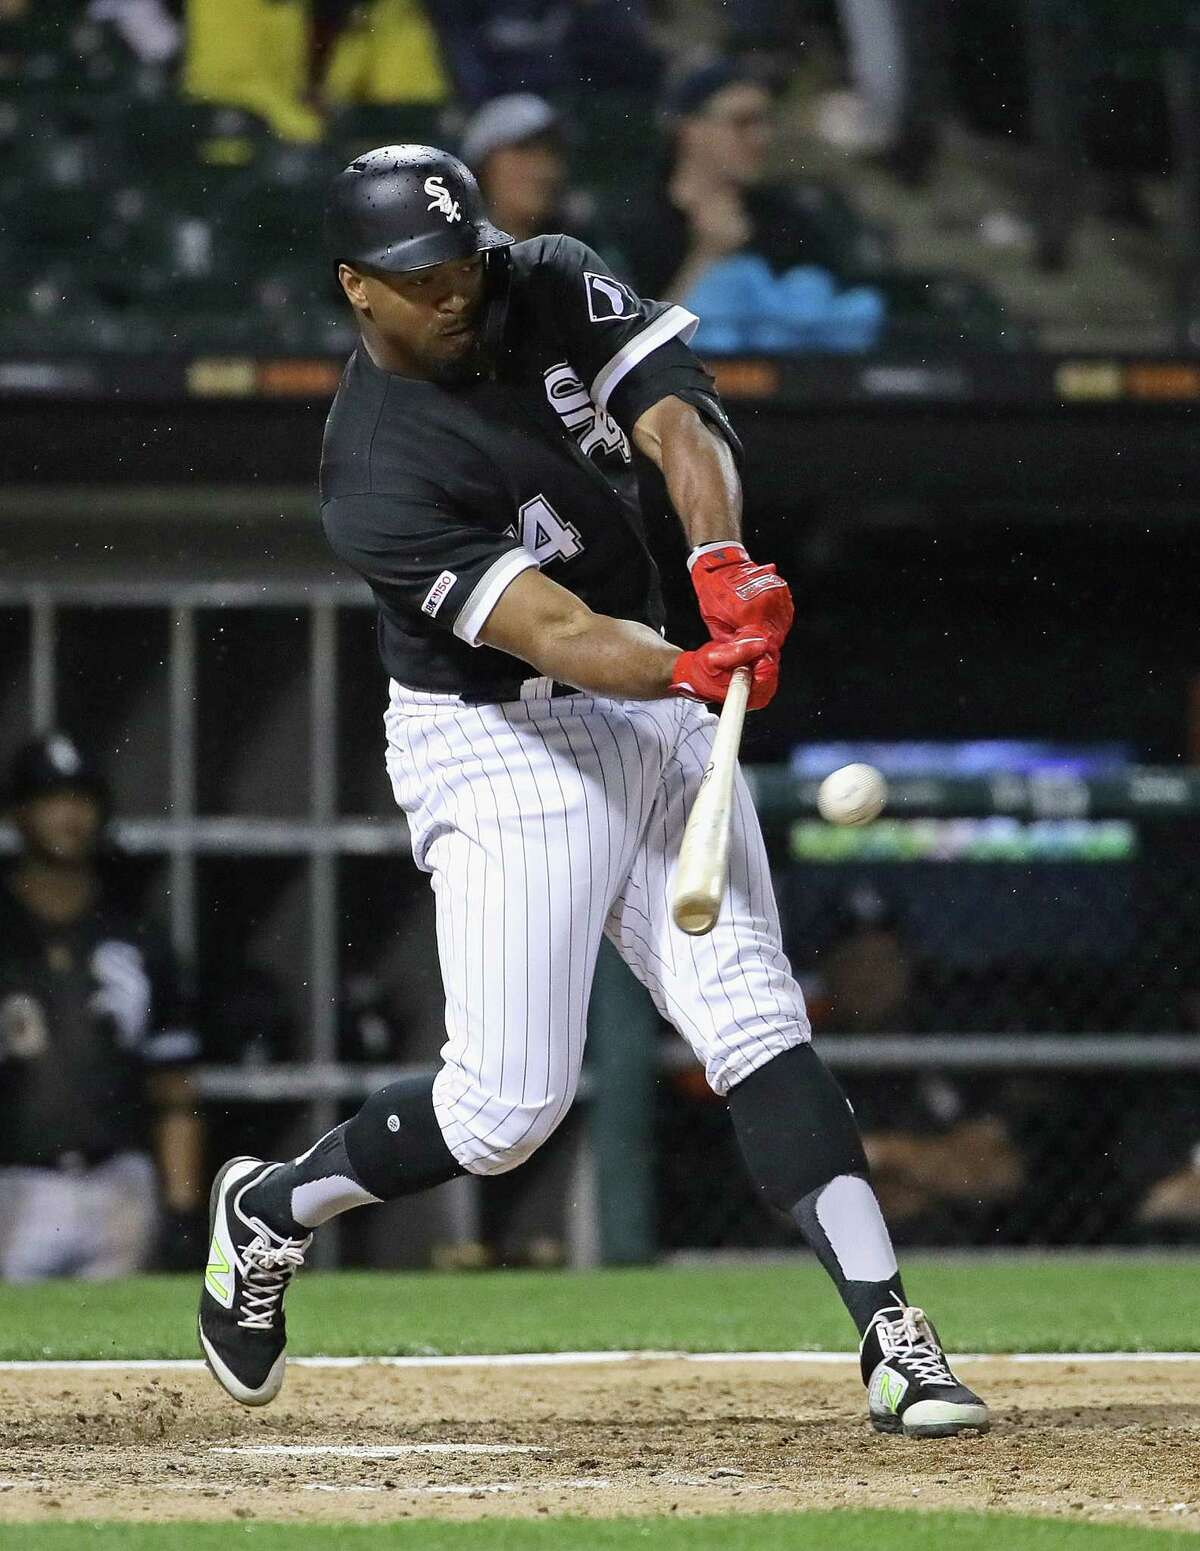 CHICAGO, ILLINOIS - JUNE 14: Eloy Jimenez #74 of the Chicago White Sox hits his second 3 run home run of the game in the 6th inning against the New York Yankees at Guaranteed Rate Field on June 14, 2019 in Chicago, Illinois. (Photo by Jonathan Daniel/Getty Images)